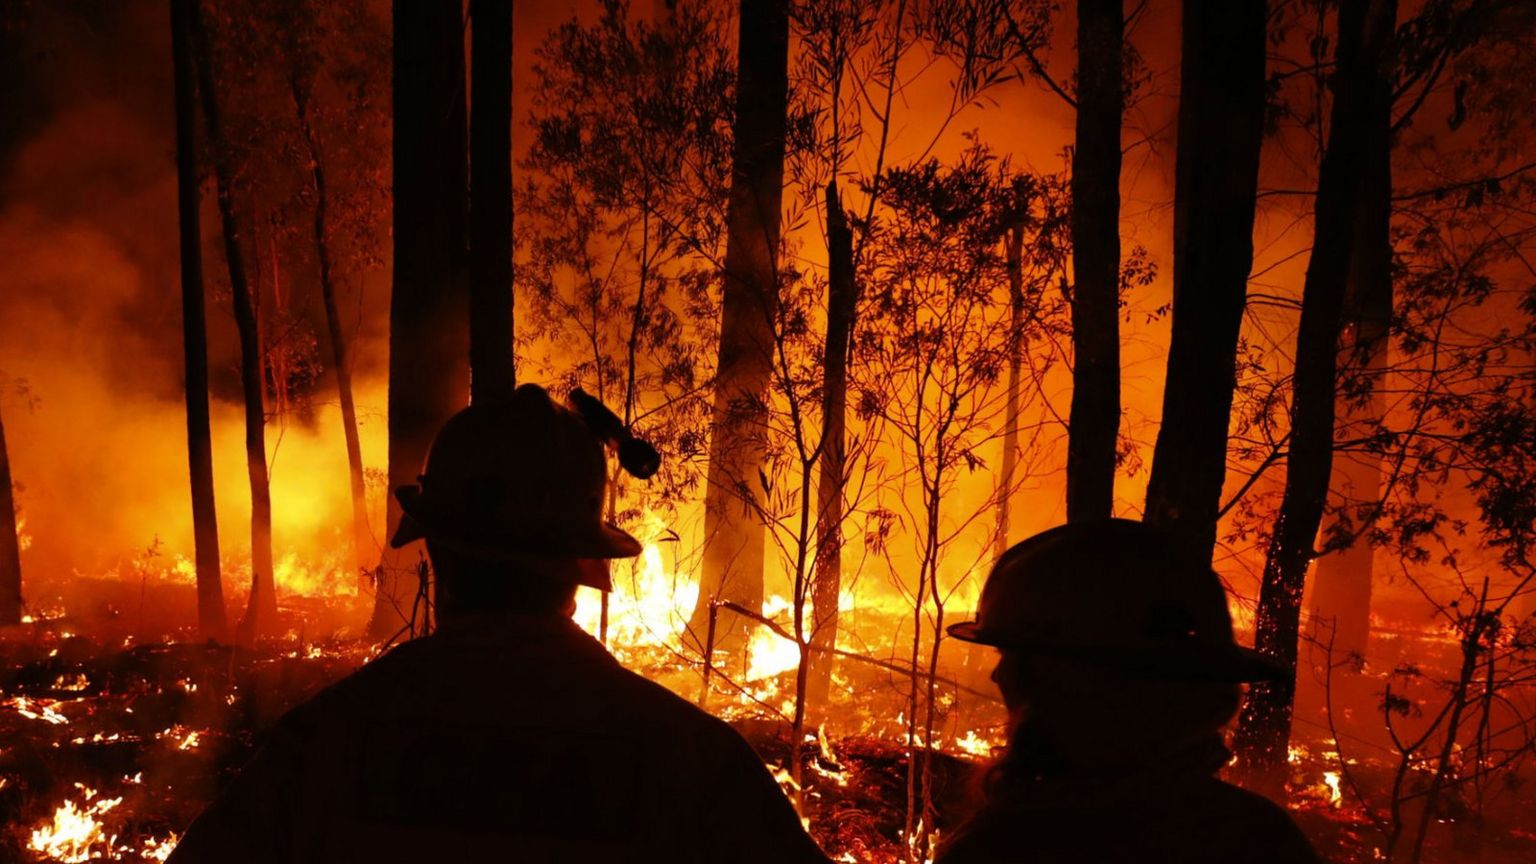 Crews monitor fires in east Gipplsland, Australia, on 02 January, 2020